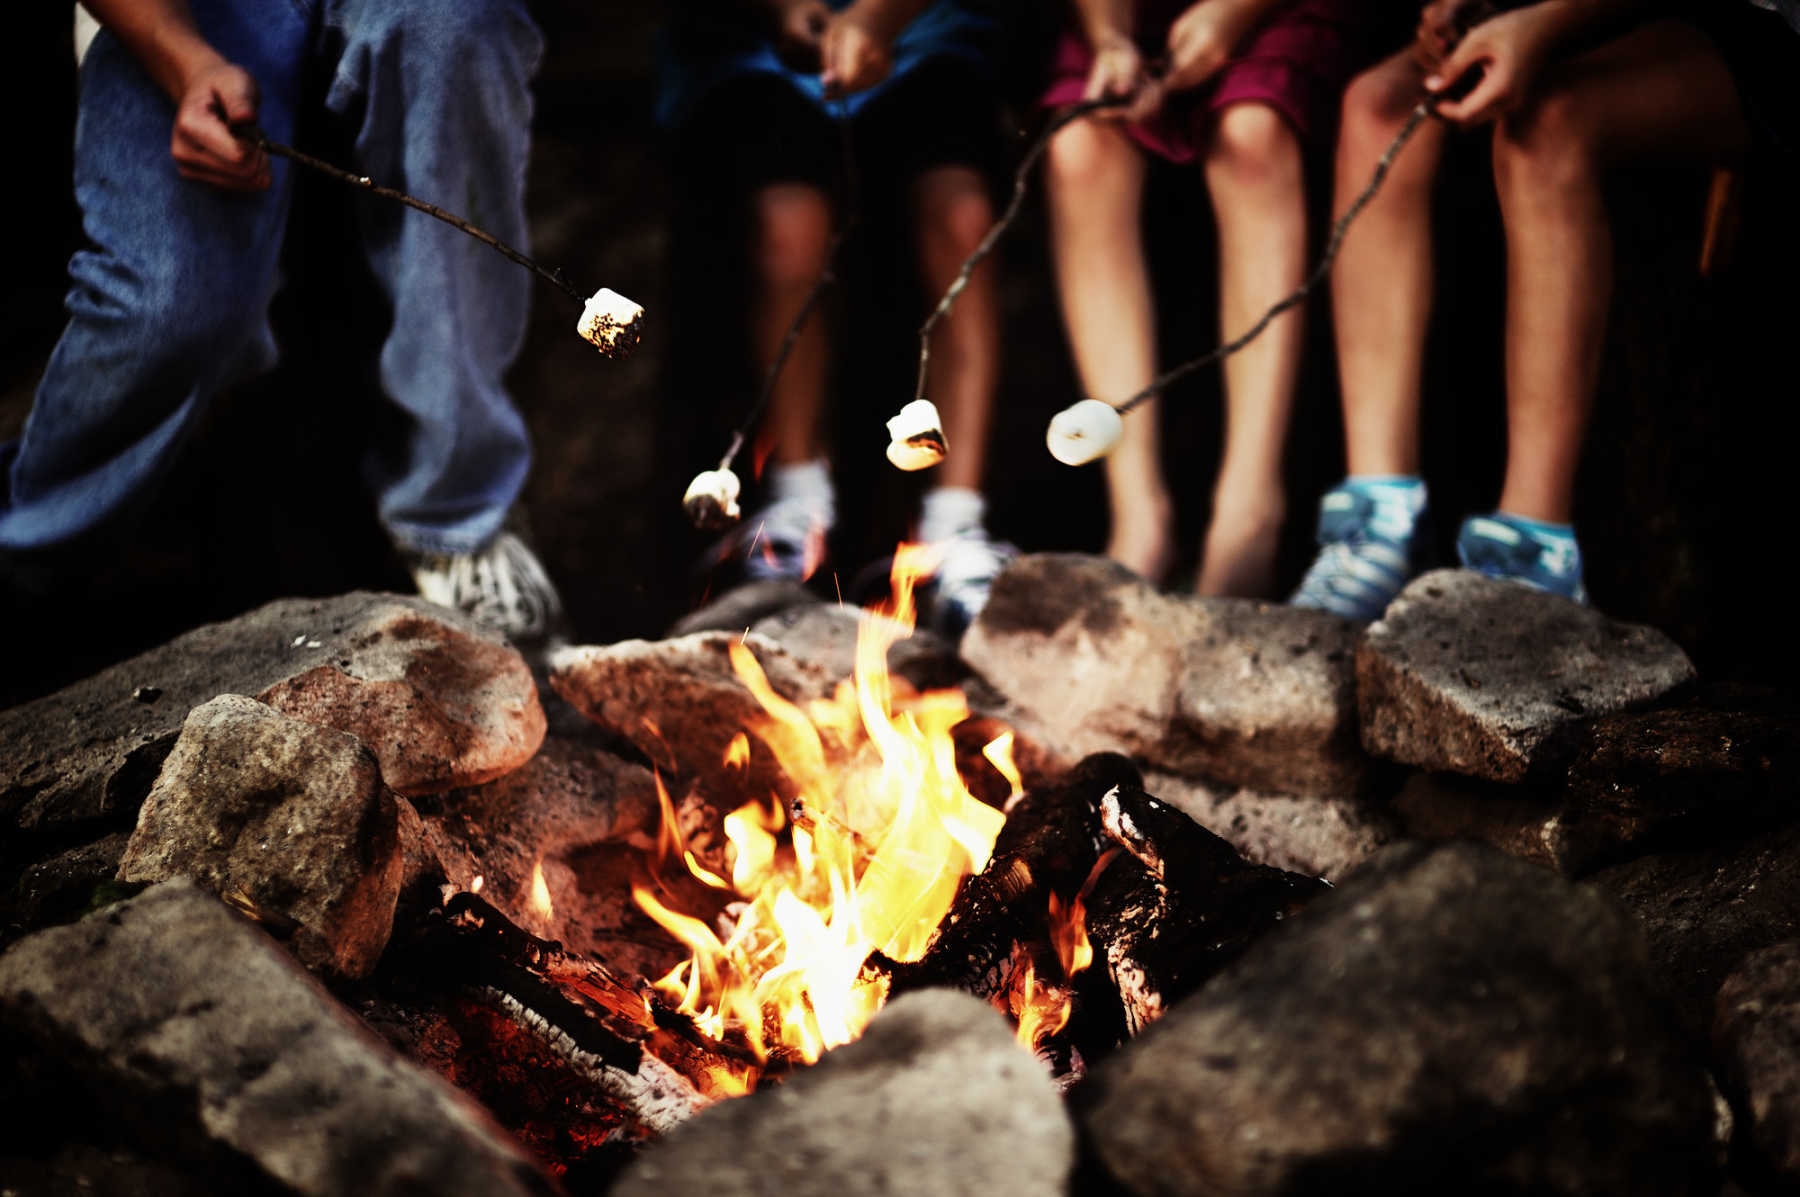 telling scary stories at the campfire (from